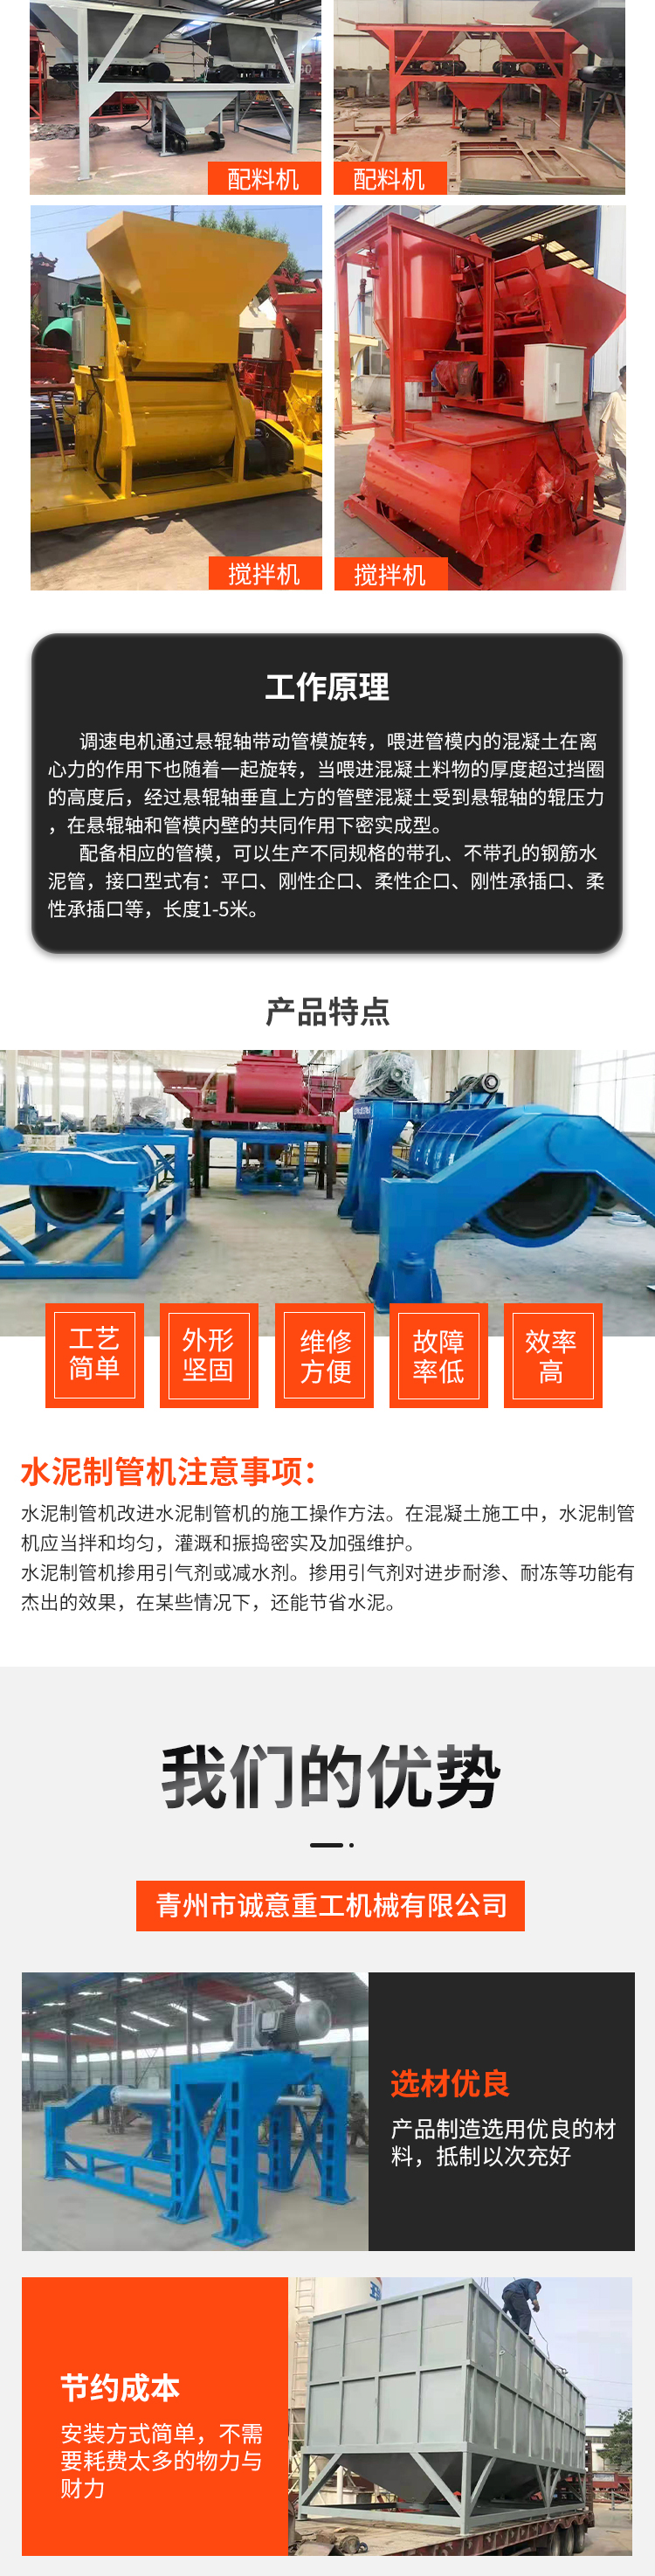 Cement pipe making machine - Pipe making machine mold - Drainage pipe forming equipment